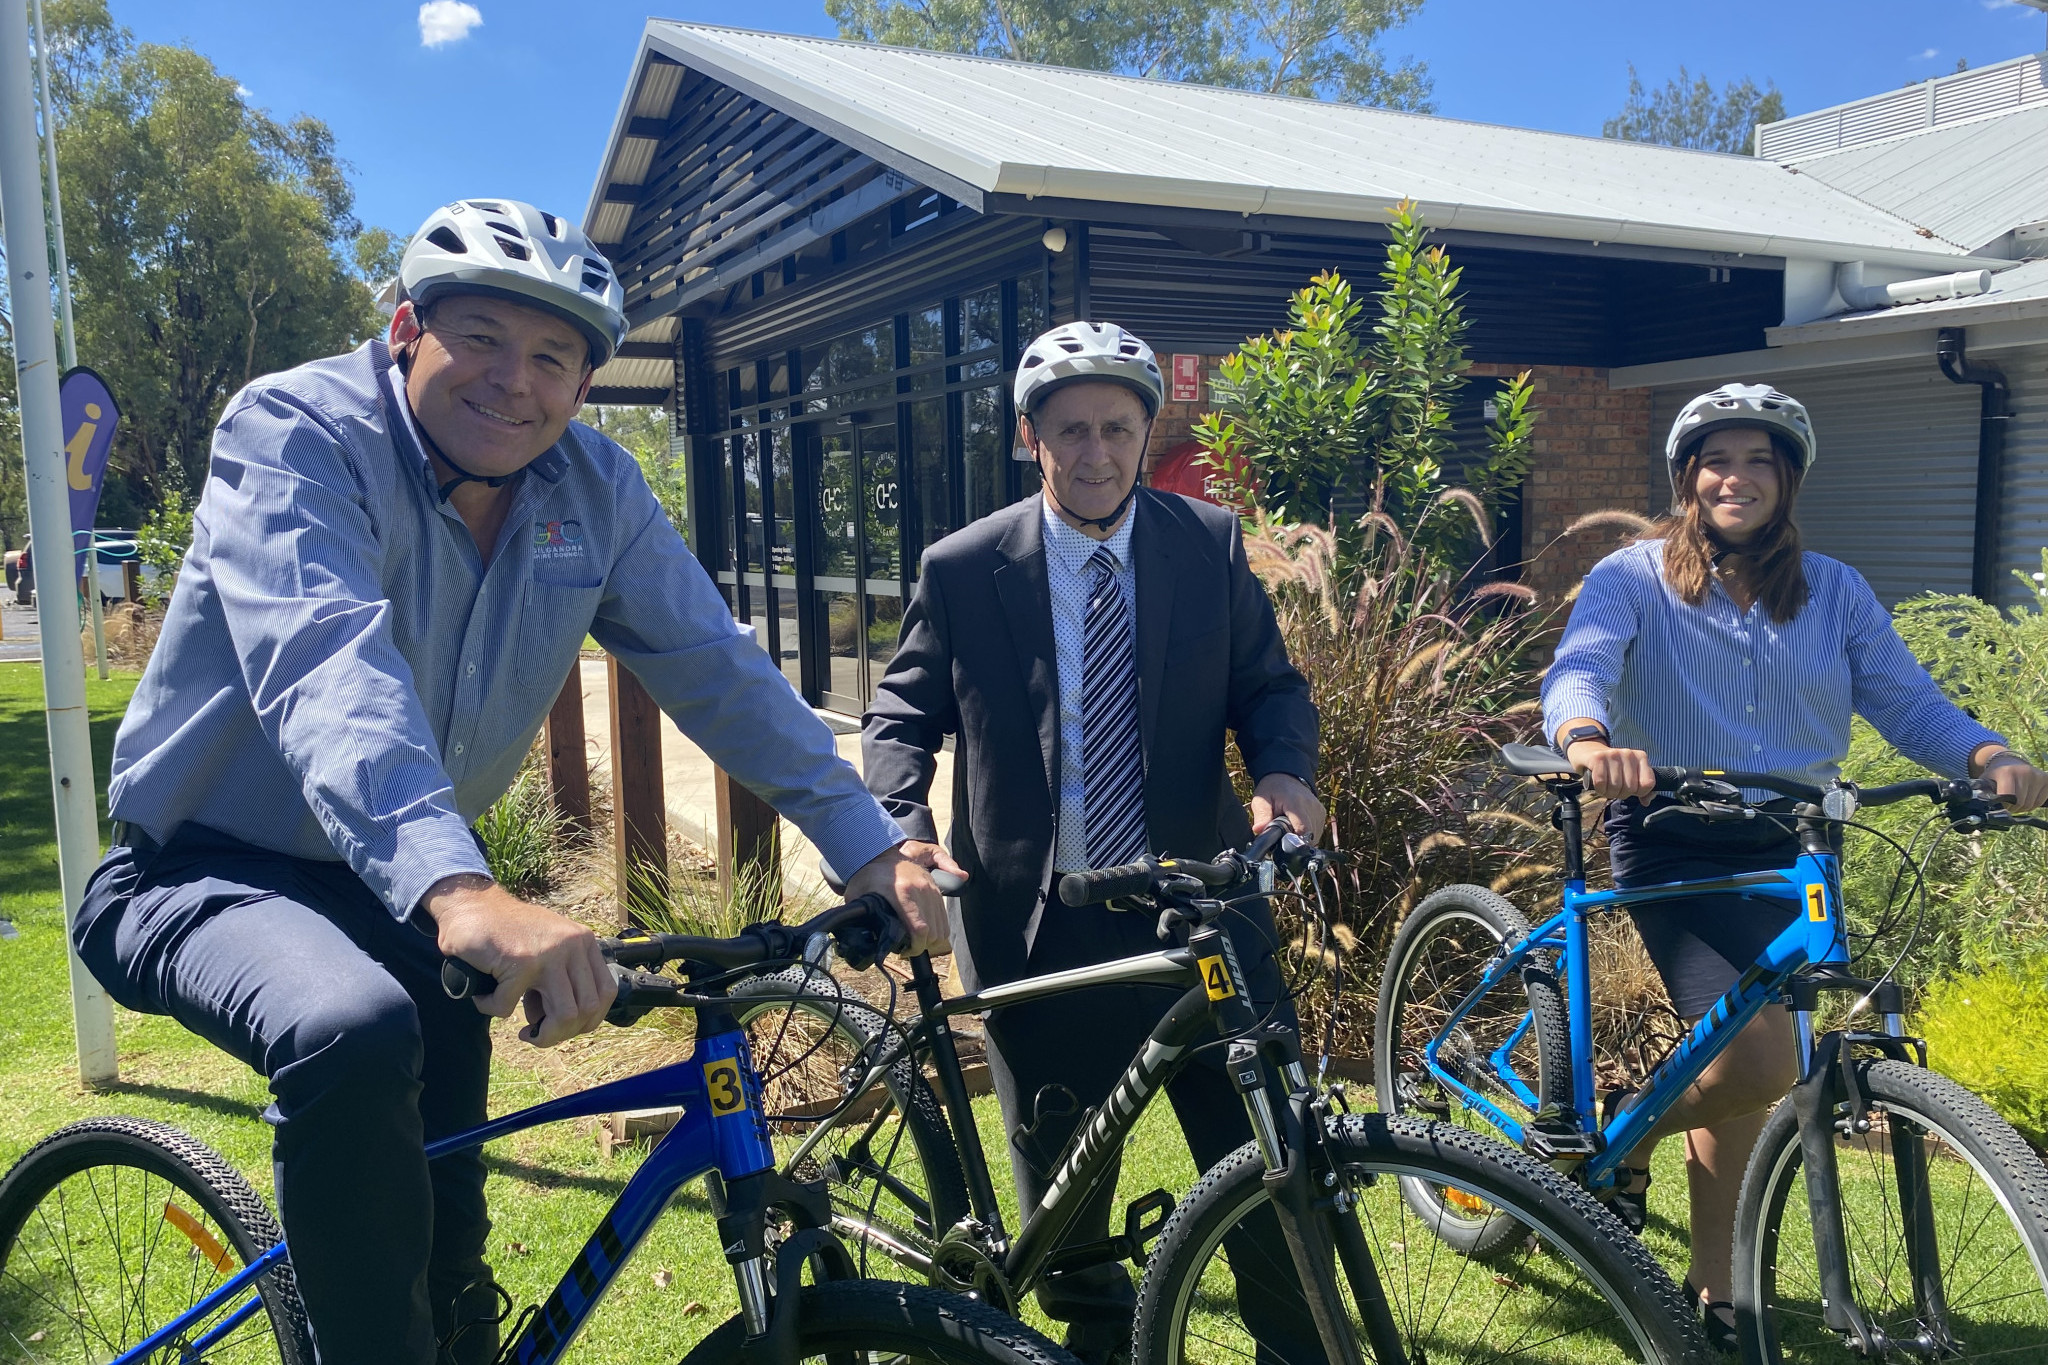 Gilgandra Shire Council’s general manager David Neeves, mayor Doug Batten, and Acting activation and communication manager, Merscia Kouroulis are excited about the new bike hire service being launched at the CHC this weekend. Photo supplied.